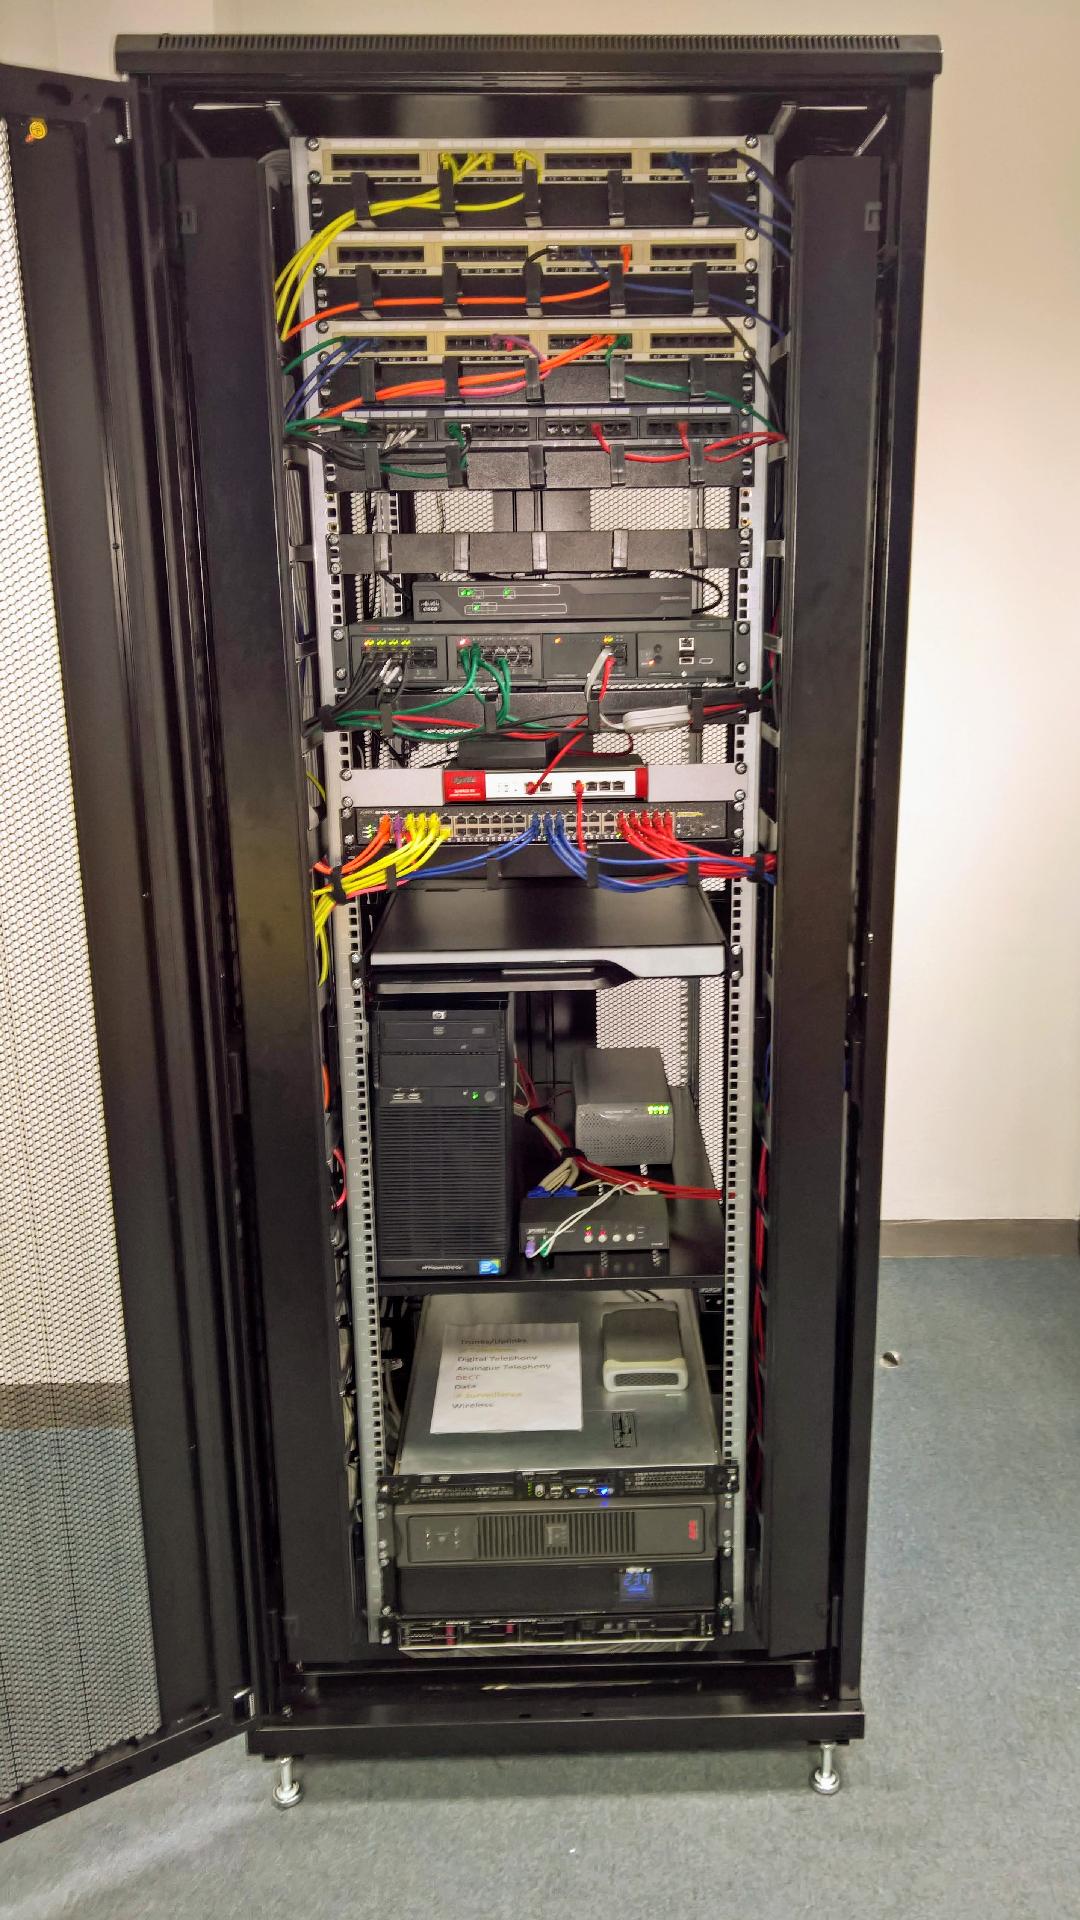 7 Tips For Keeping A Data Cabinet Tidy, Home Network Wiring Cabinet Uk